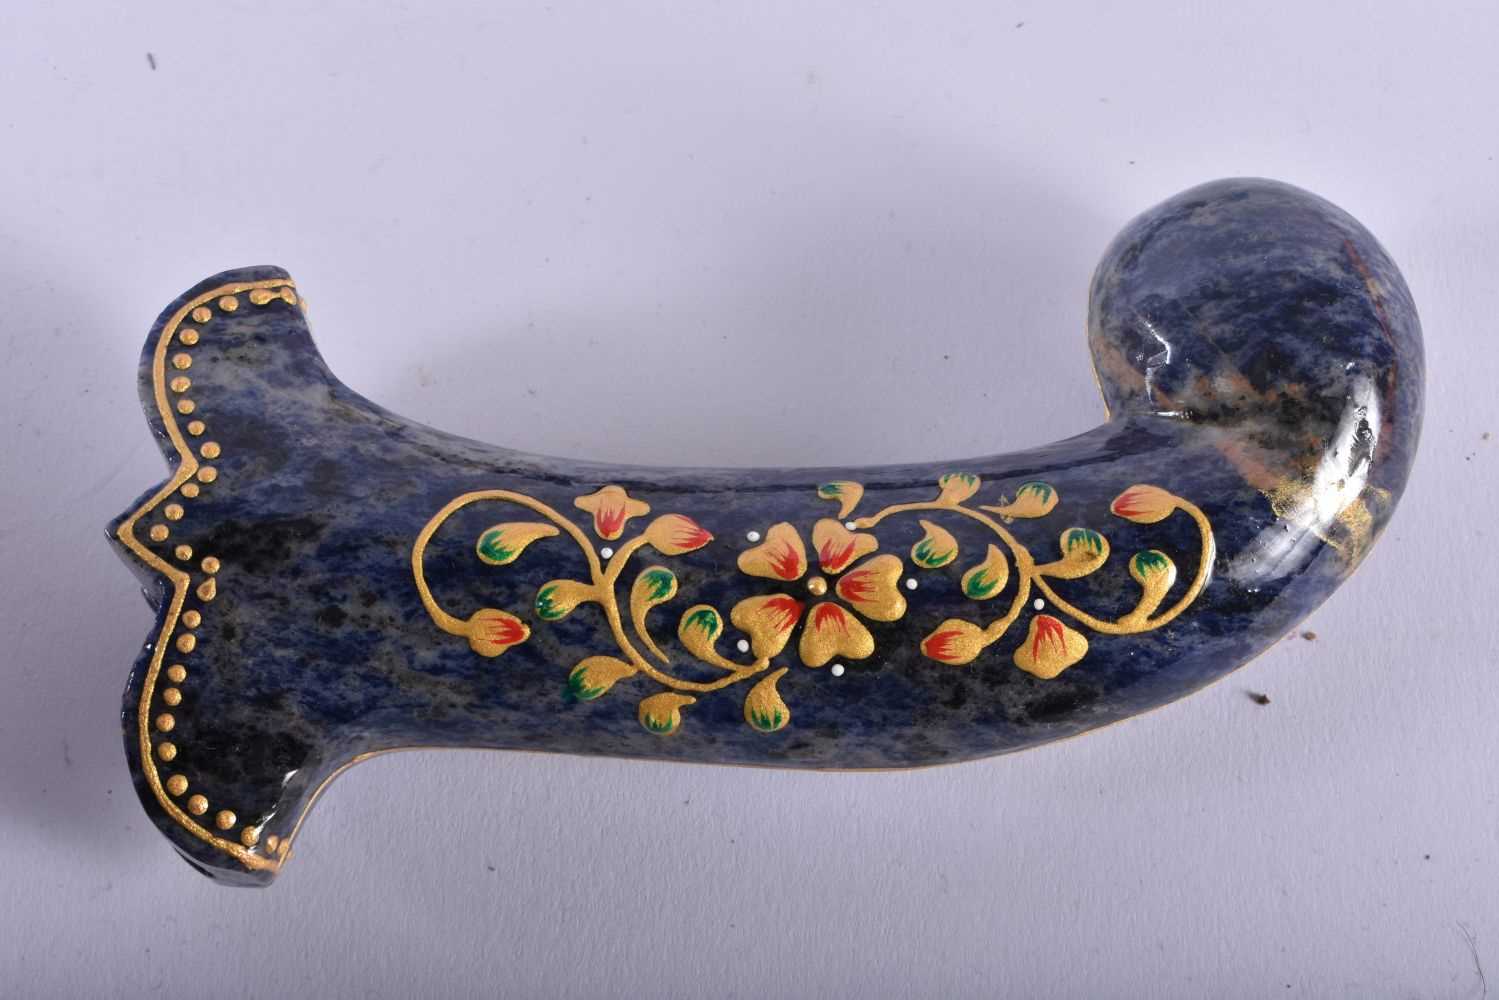 A SET OF FIVE MIDDLE EASTERN QAJAR LACQUER HARDSTONE DAGGER HANDLES overlaid with foliage and vines. - Image 3 of 4